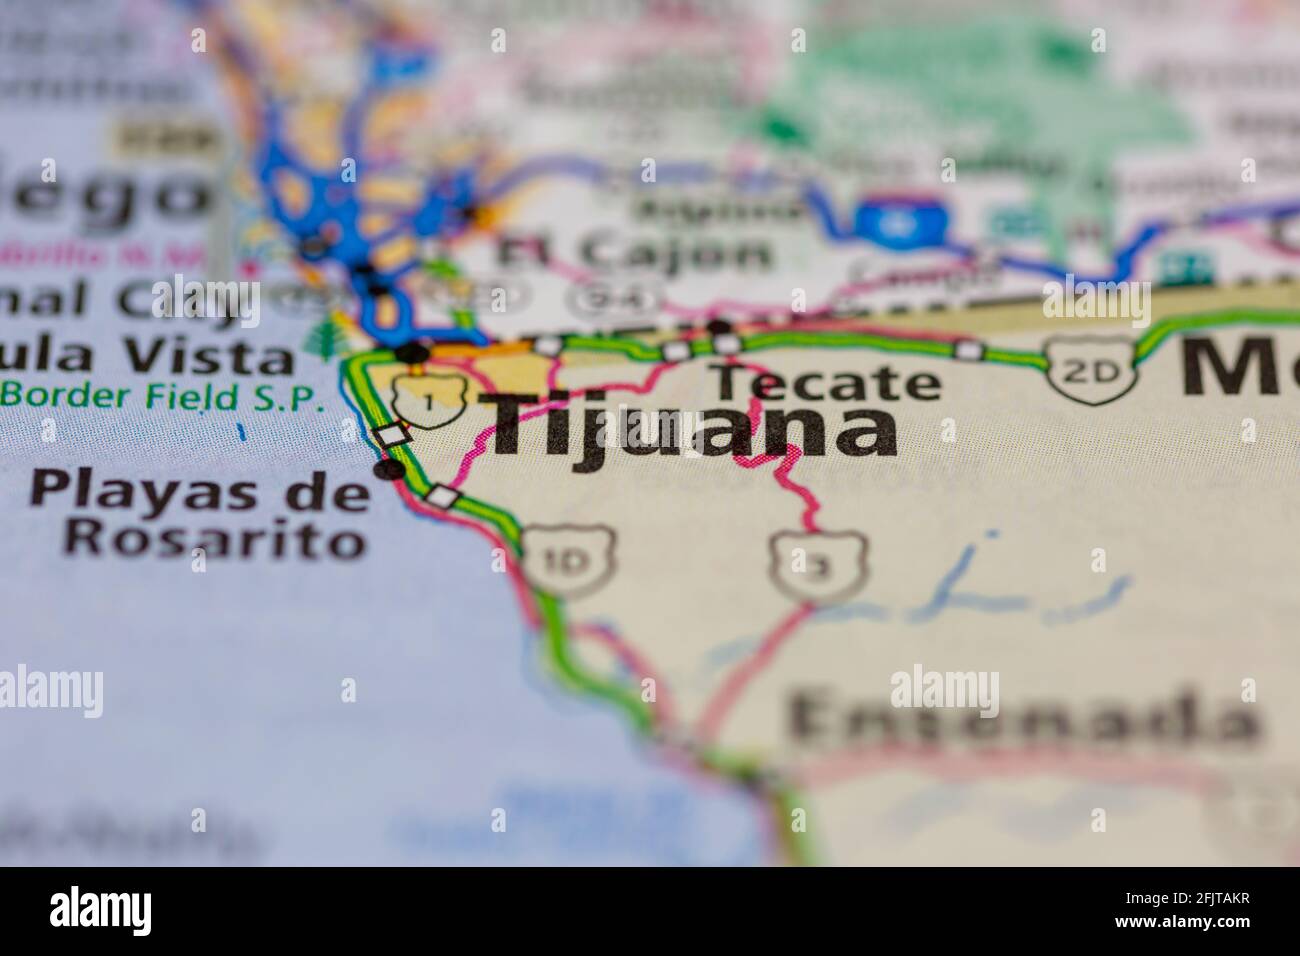 Tijuana Mexico and surrounding areas Shown on a road map or Geography map Stock Photo